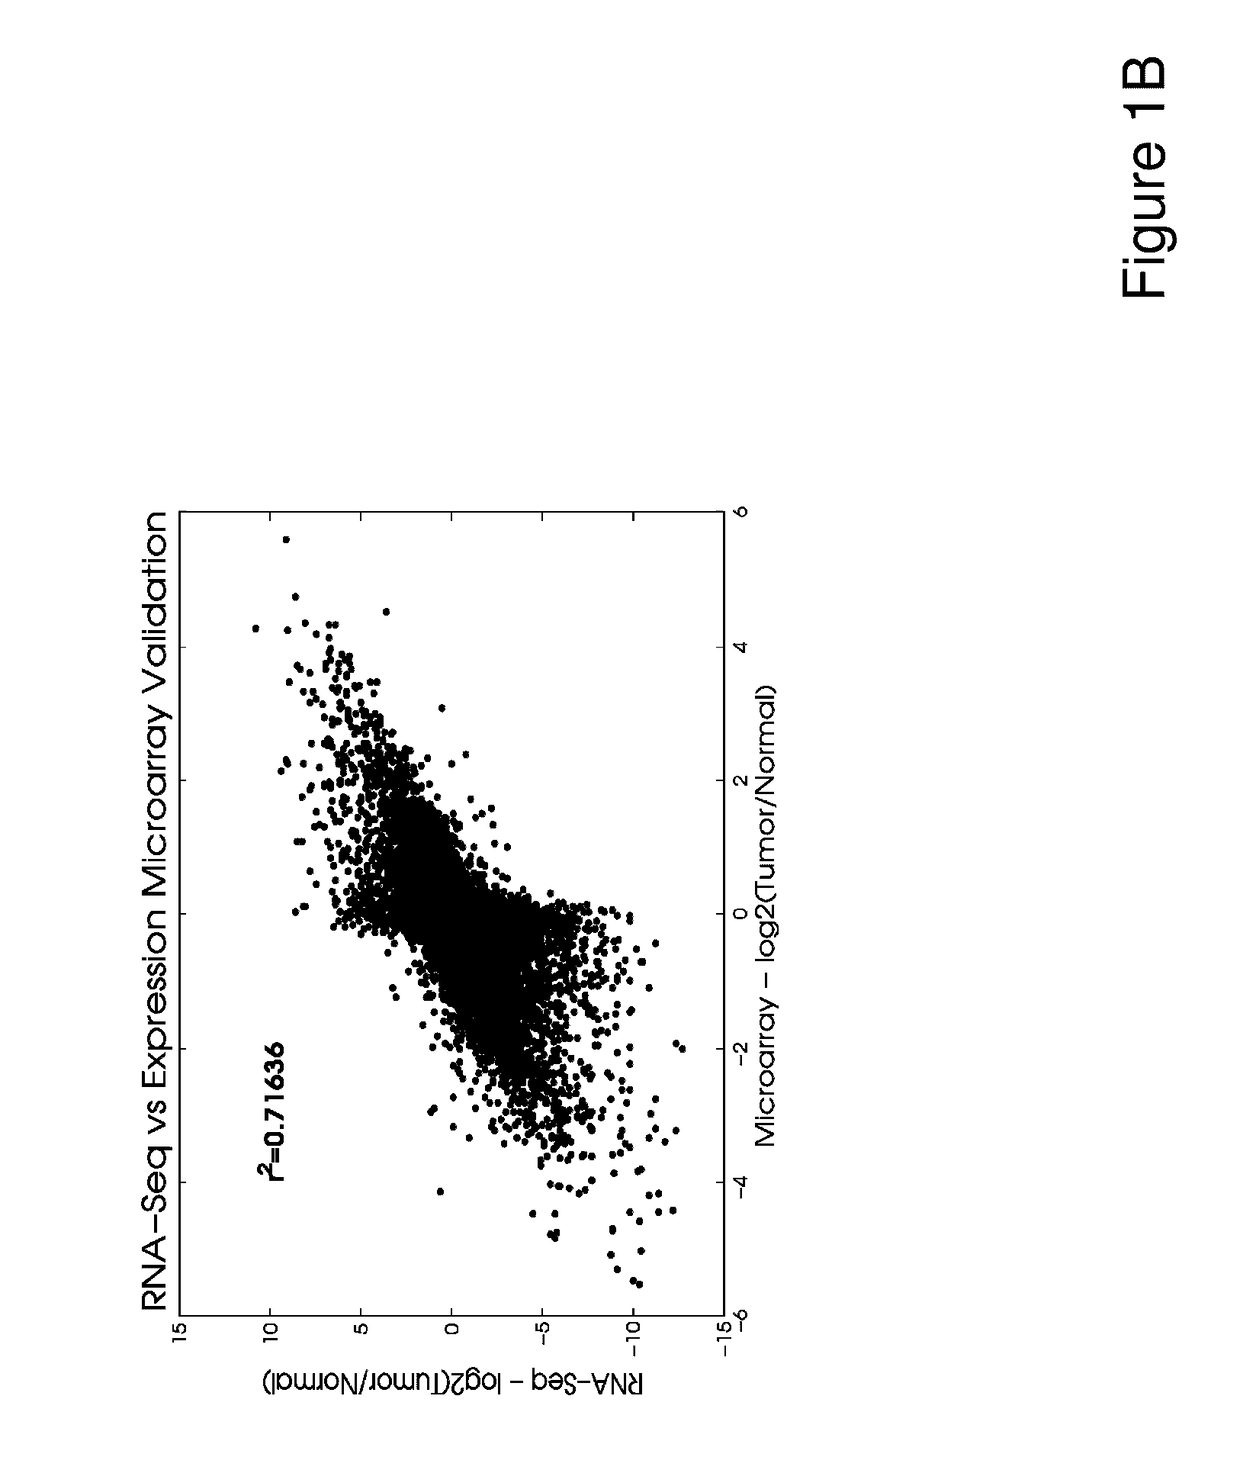 Biomarkers and methods of use thereof